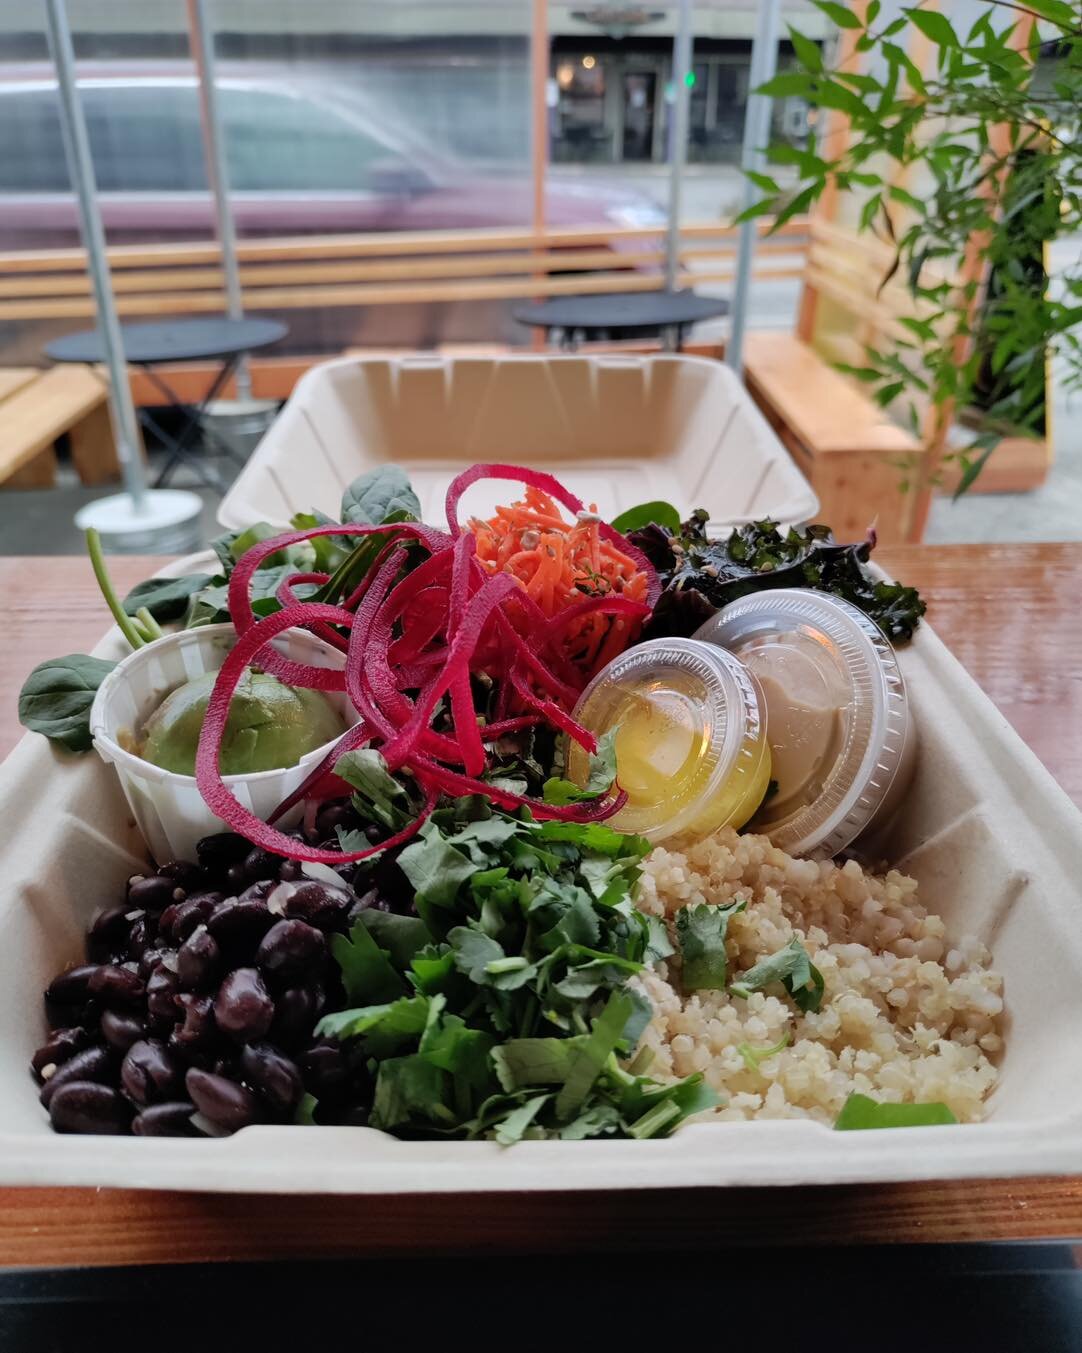 Open Til 7 pm Mon &amp; Tues!  Nourishing Grab N Go, warm-grain Salad Bowls, Hot Soup,  Yam Curry over quinoa or brown rice, house-made dressings, vegan gf raw trail Cookies, and more! Earn discounts at the walk-up window using our handy 
self-orderi